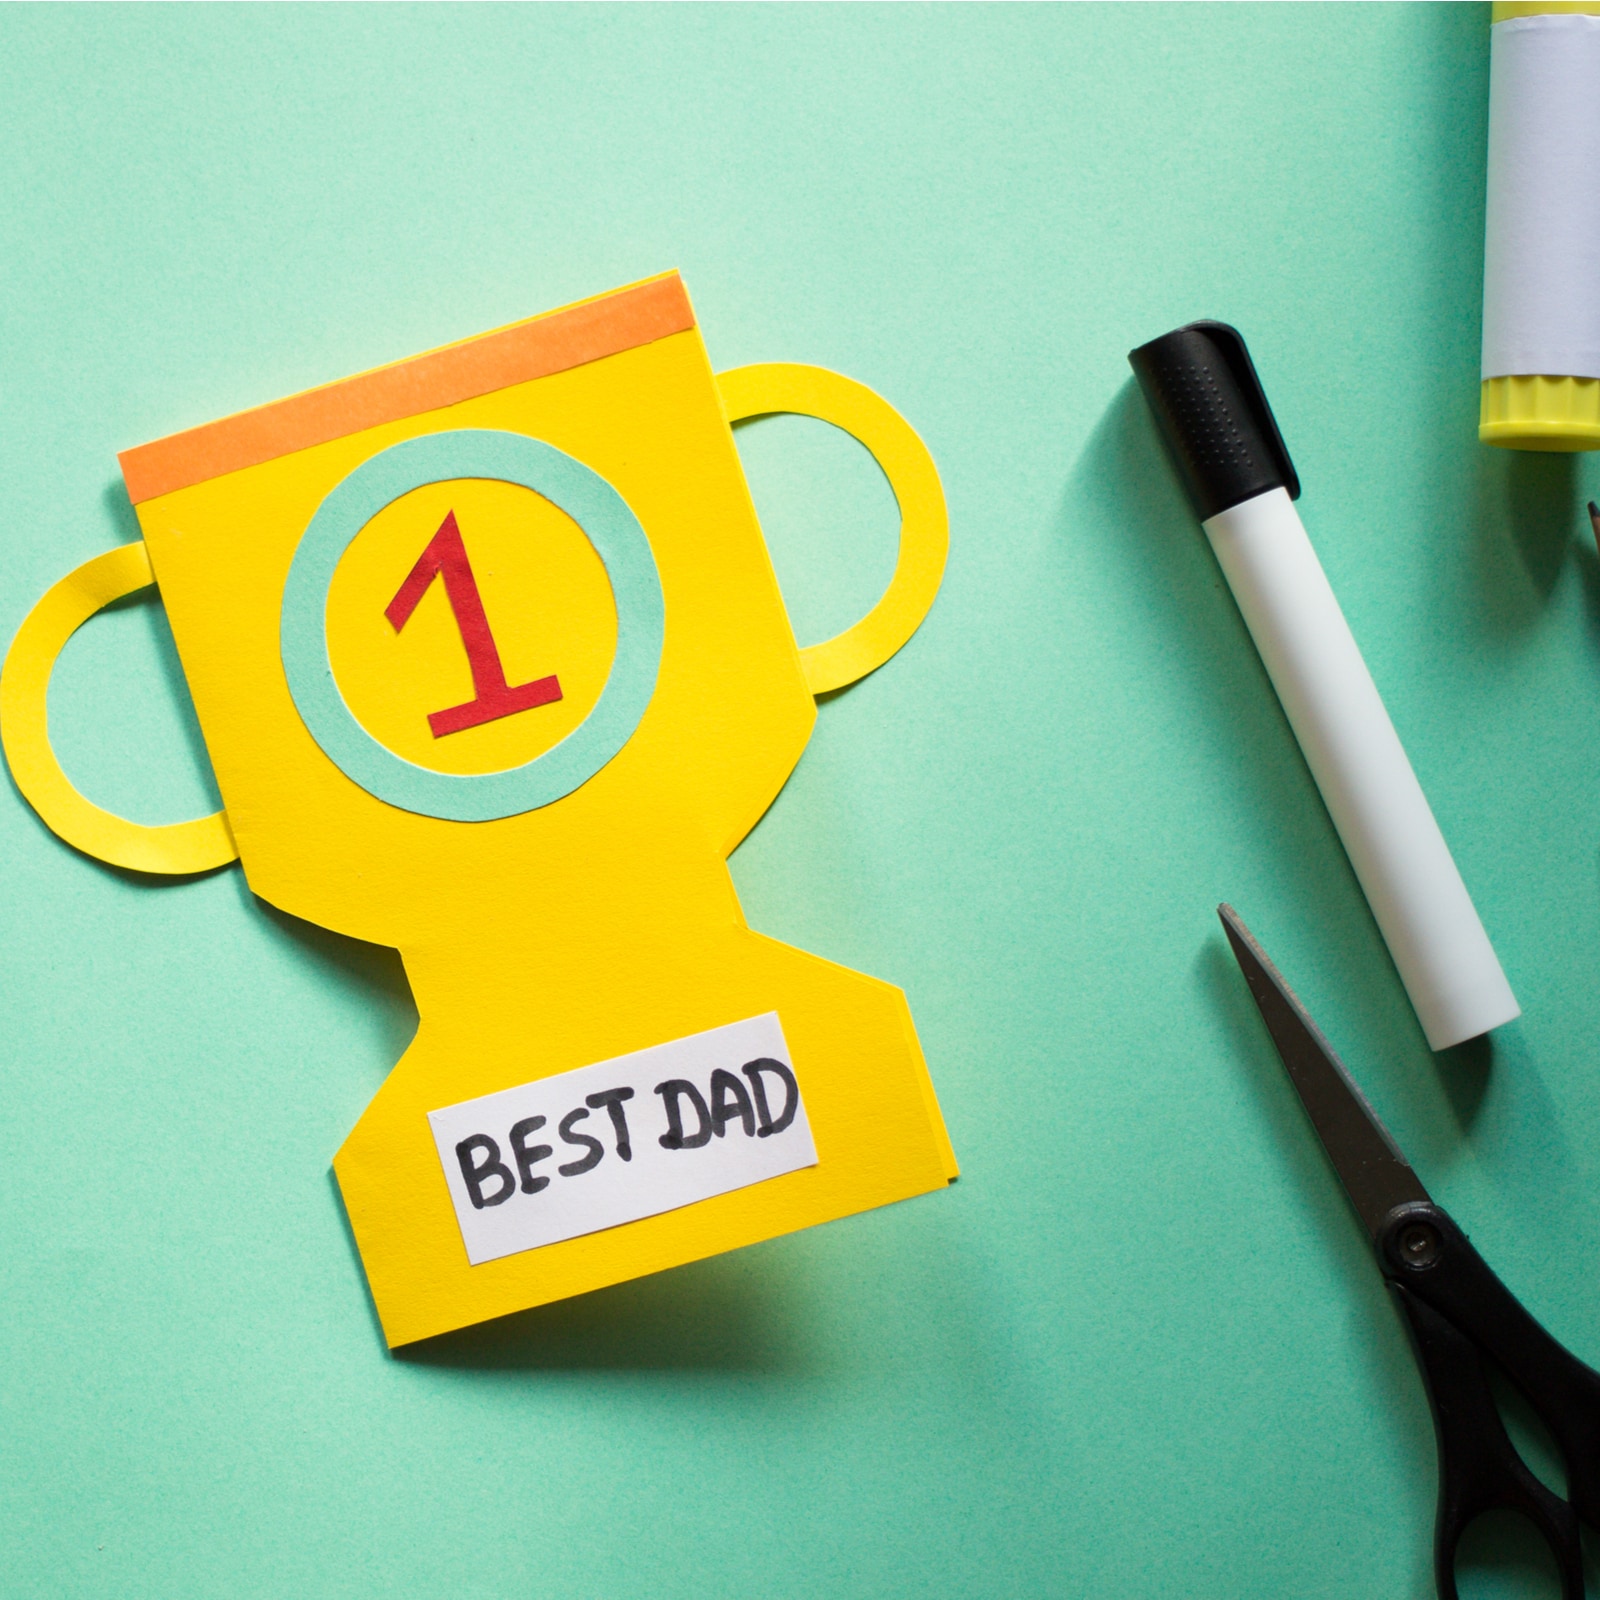 Father's Day 2022: Easy and Love-Filled Homemade Gifts for Your Dad